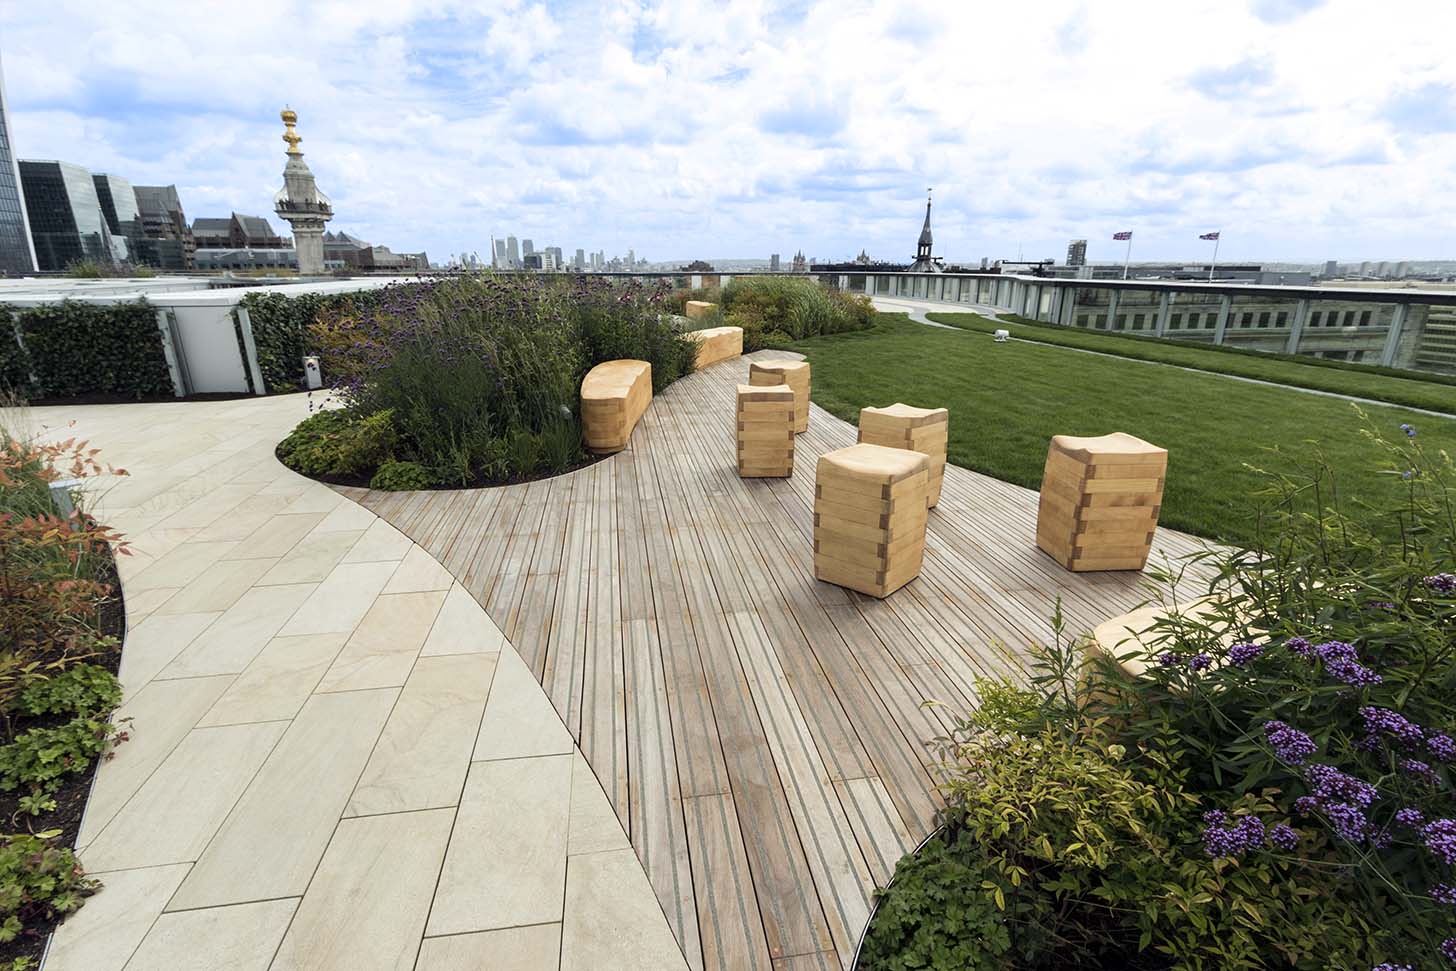 How to make Rooftop Gardens compliant with Fire Safety Regulations, Street  Furniture Manufacturers & Suppliers UK, Landmark Street Furniture : Street  Furniture Manufacturers & Suppliers UK